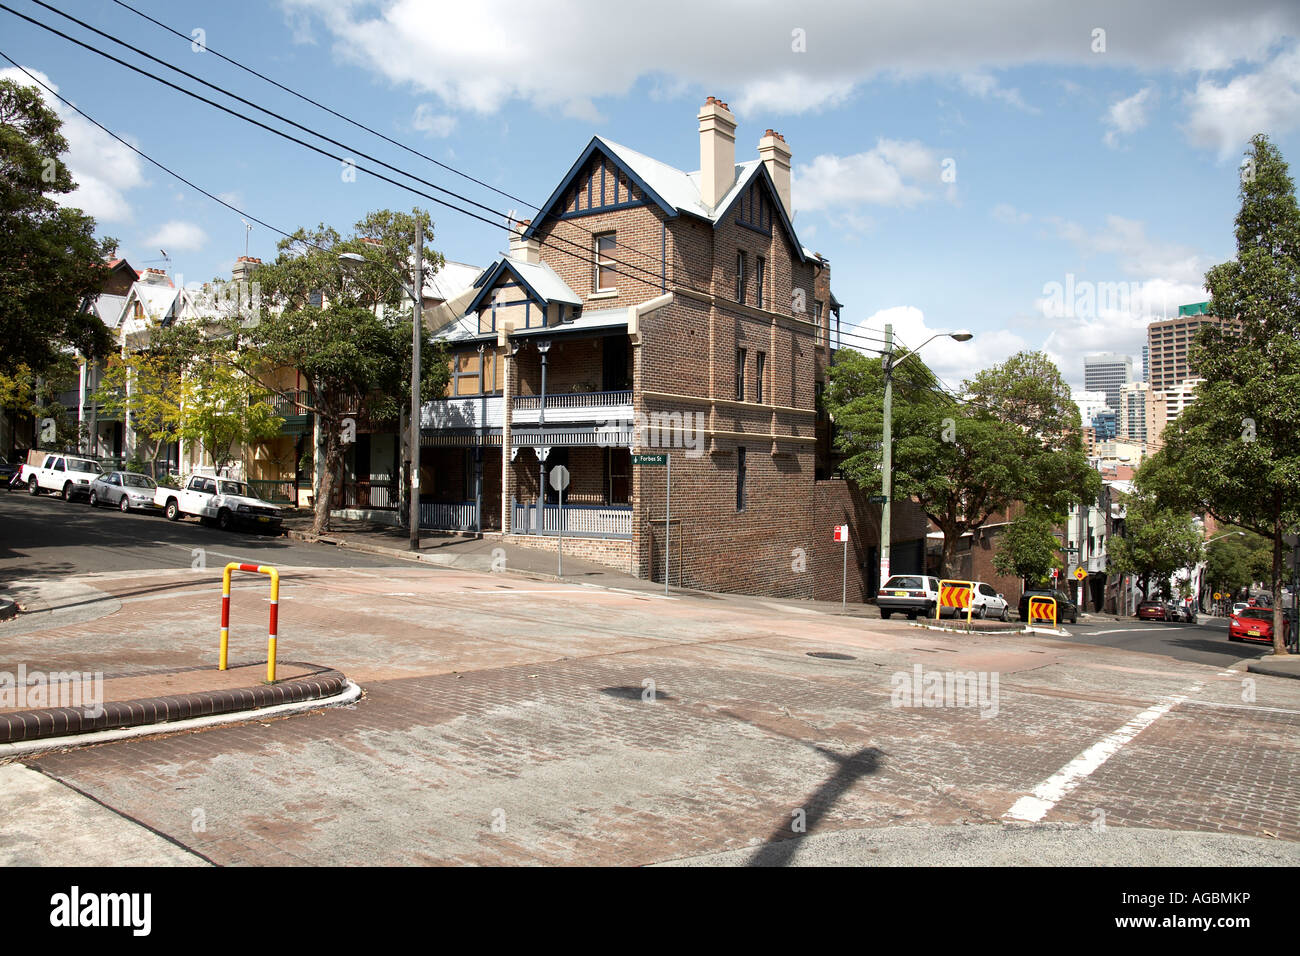 Houses in suburb of Darlinghurst Sydney New South Wales NSW Australia Stock Photo